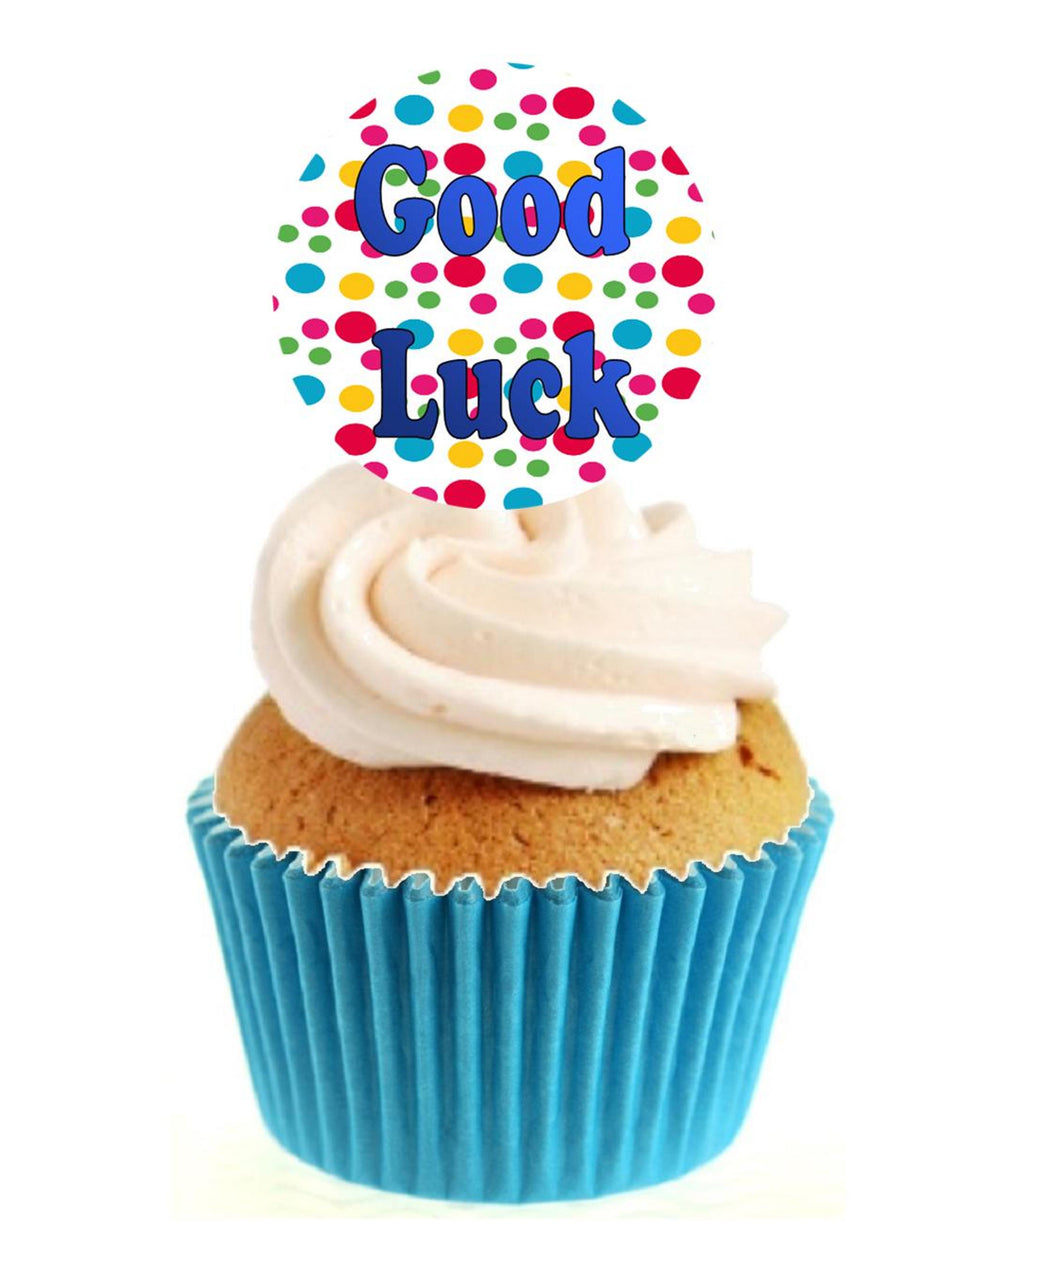 Good Luck Stand Up Cake Toppers (12 pack)  Pack contains 12 images printed onto premium wafer card